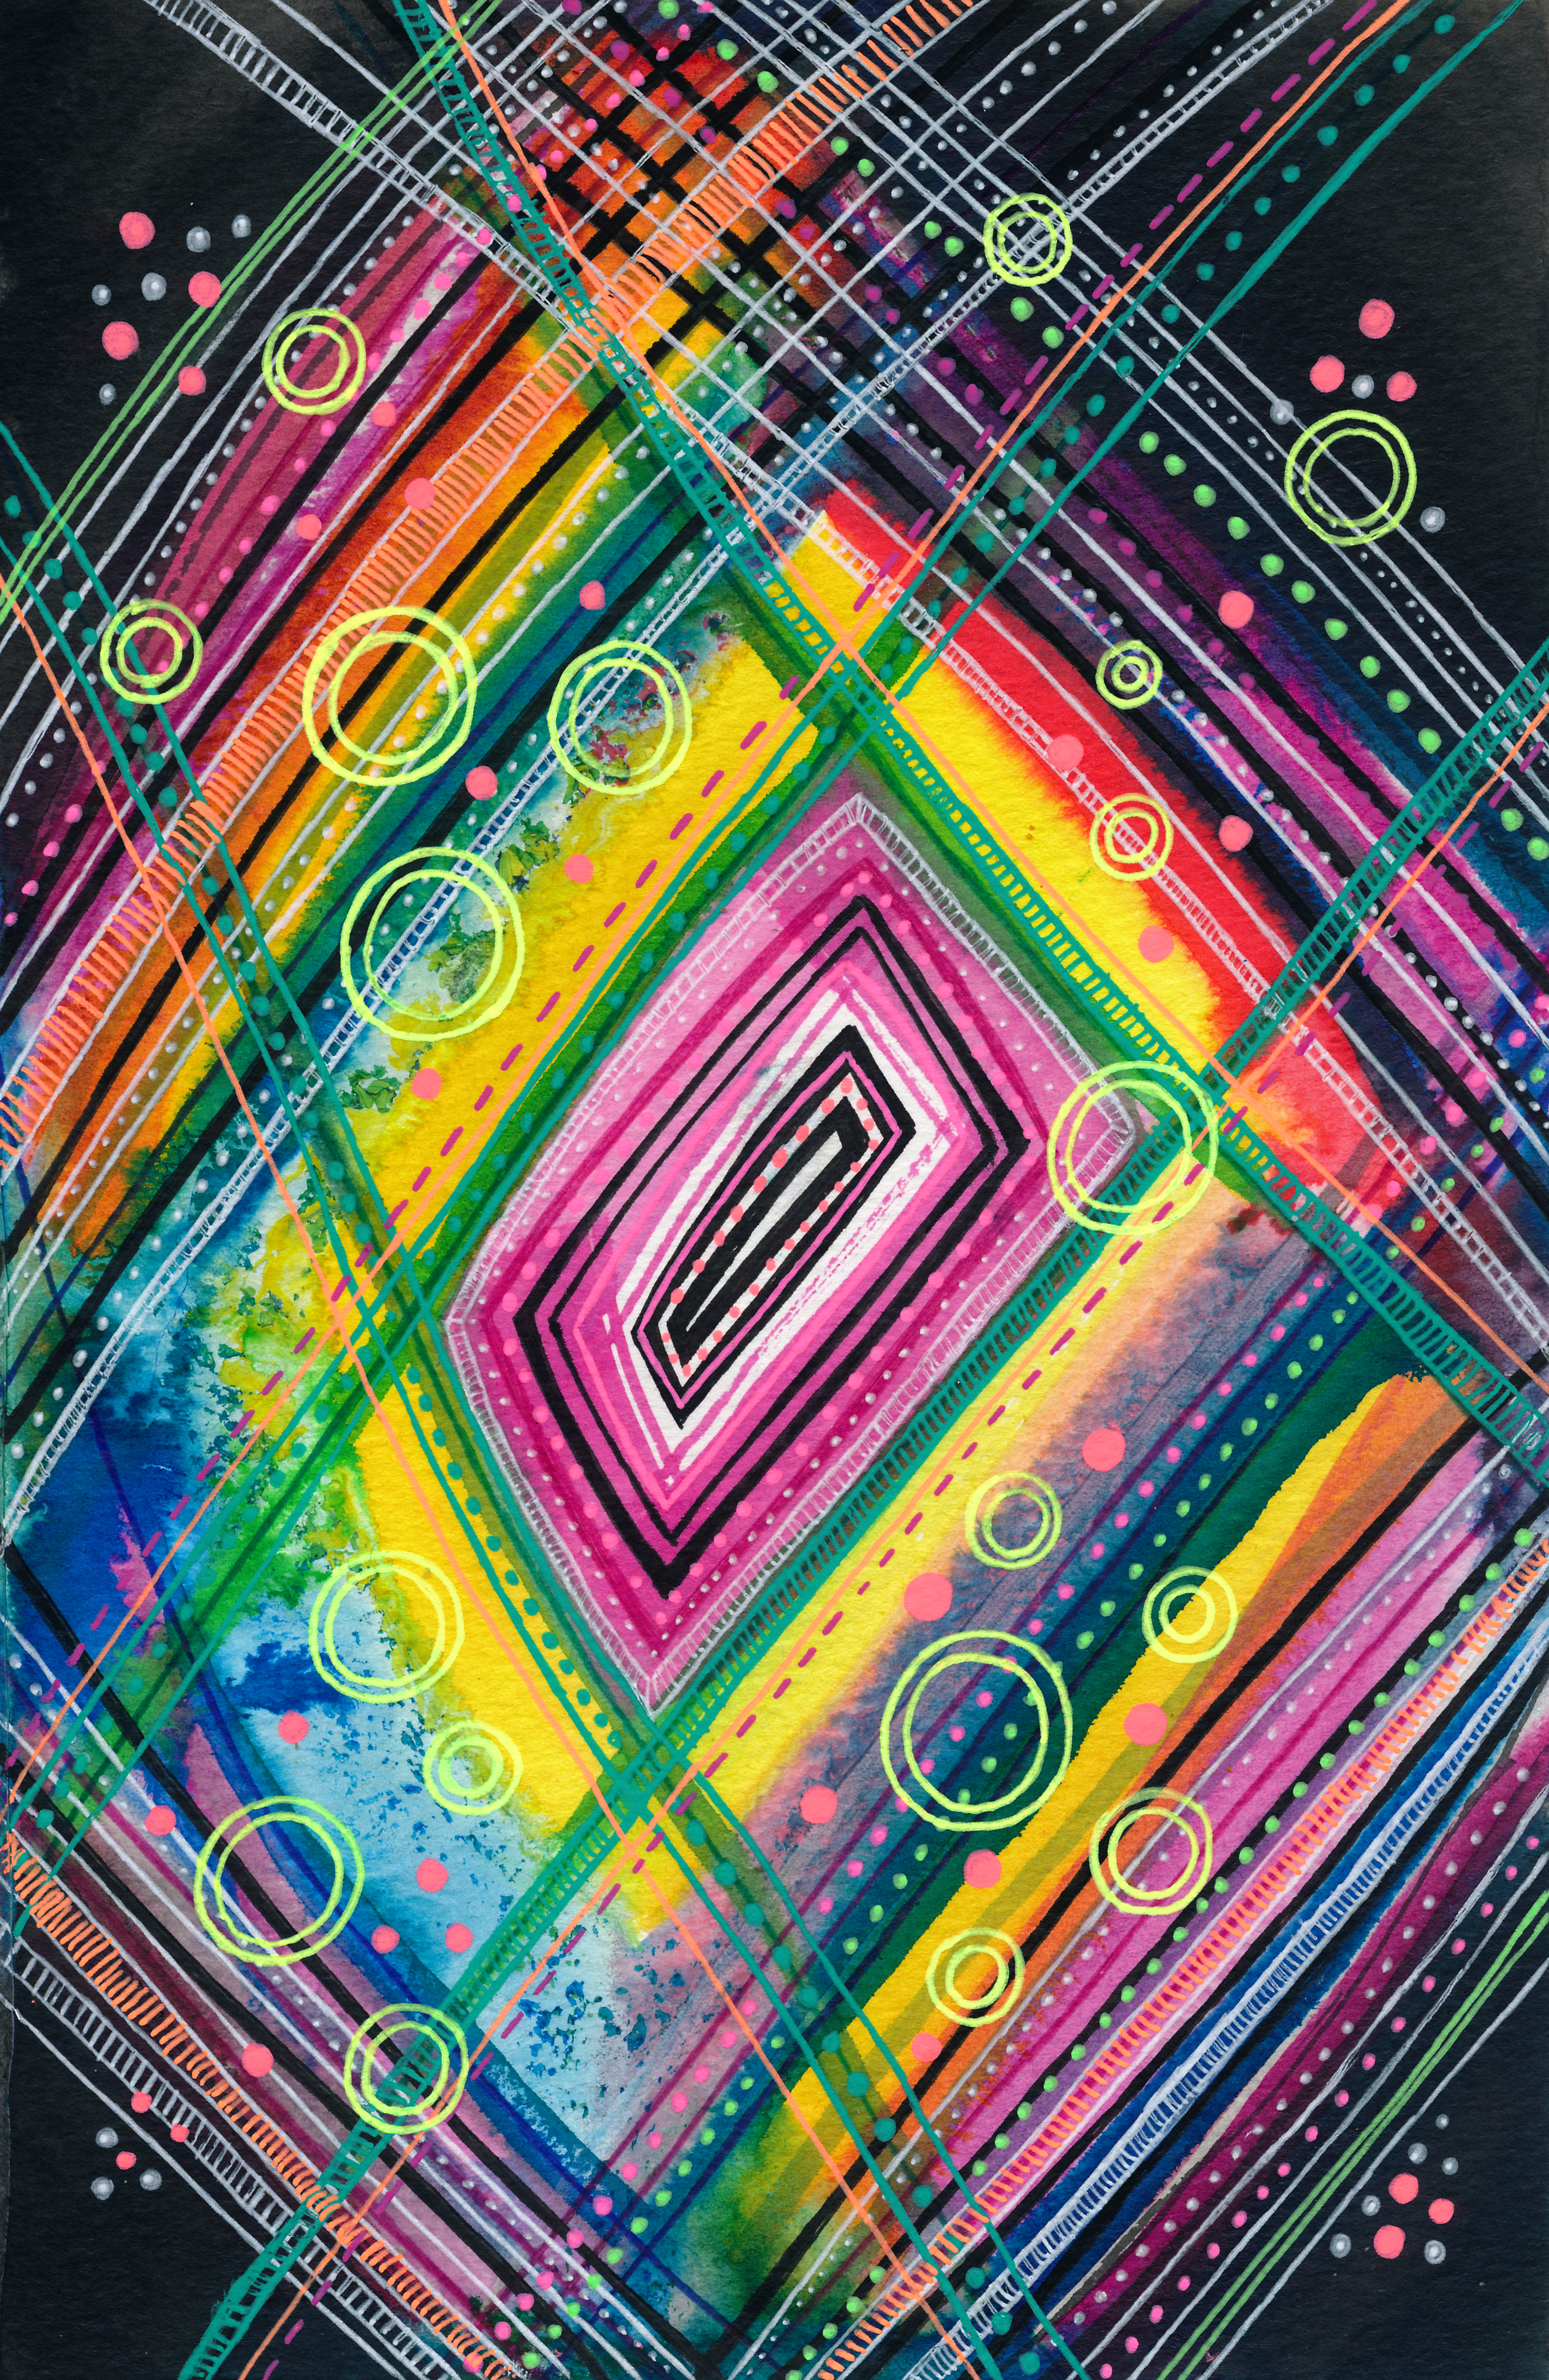 paints, multicolored, abstract, patterns, circles, motley, lines, watercolor lock screen backgrounds